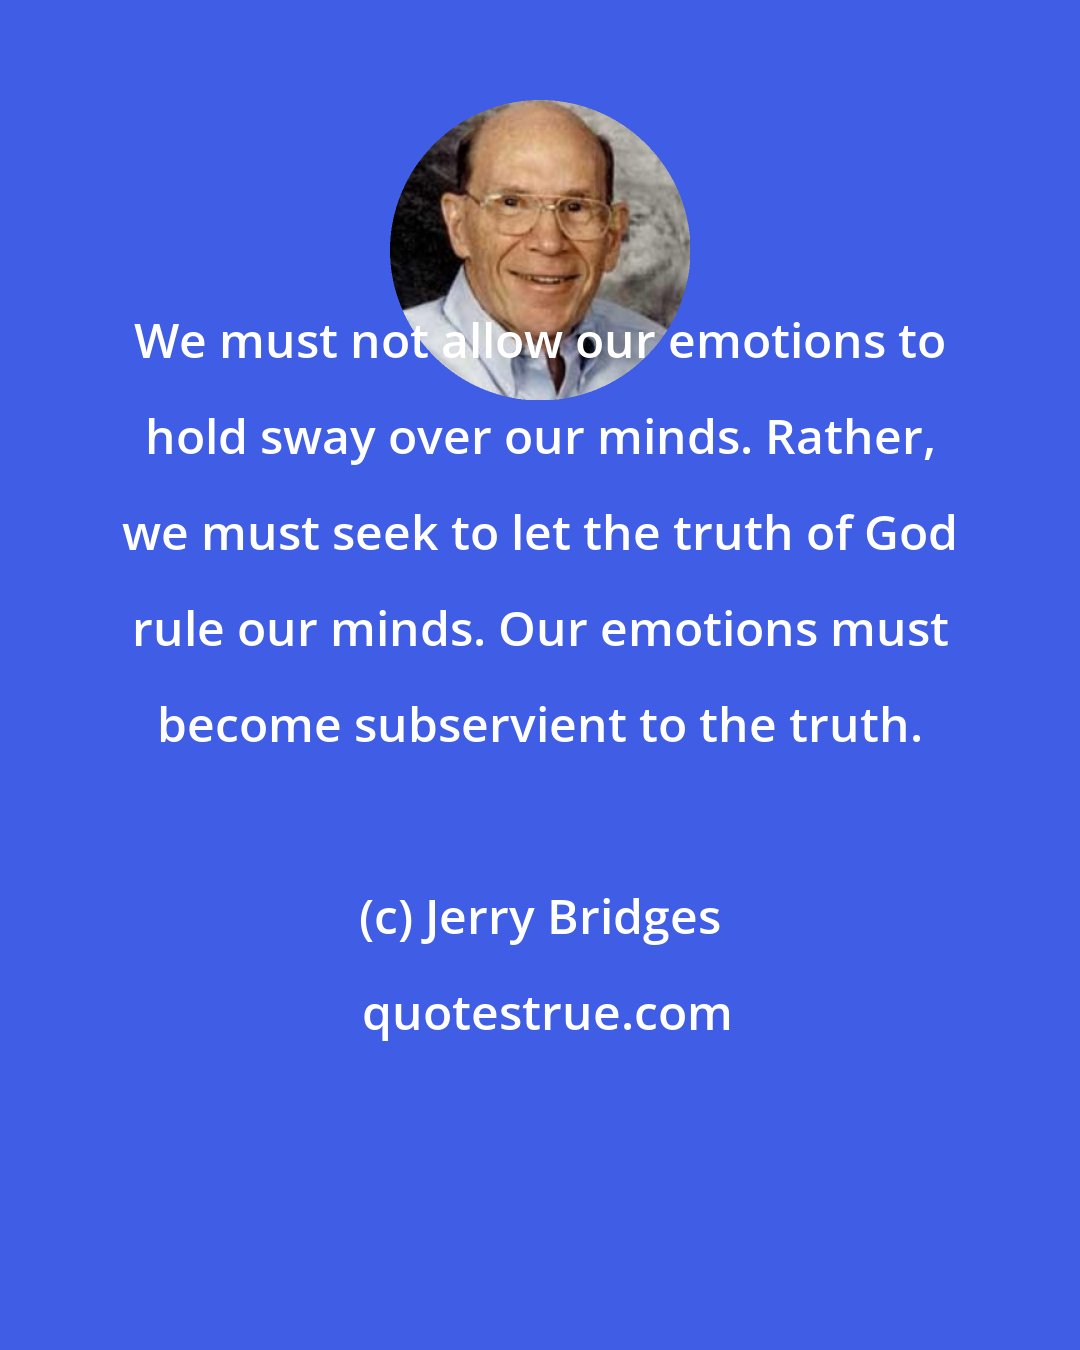 Jerry Bridges: We must not allow our emotions to hold sway over our minds. Rather, we must seek to let the truth of God rule our minds. Our emotions must become subservient to the truth.